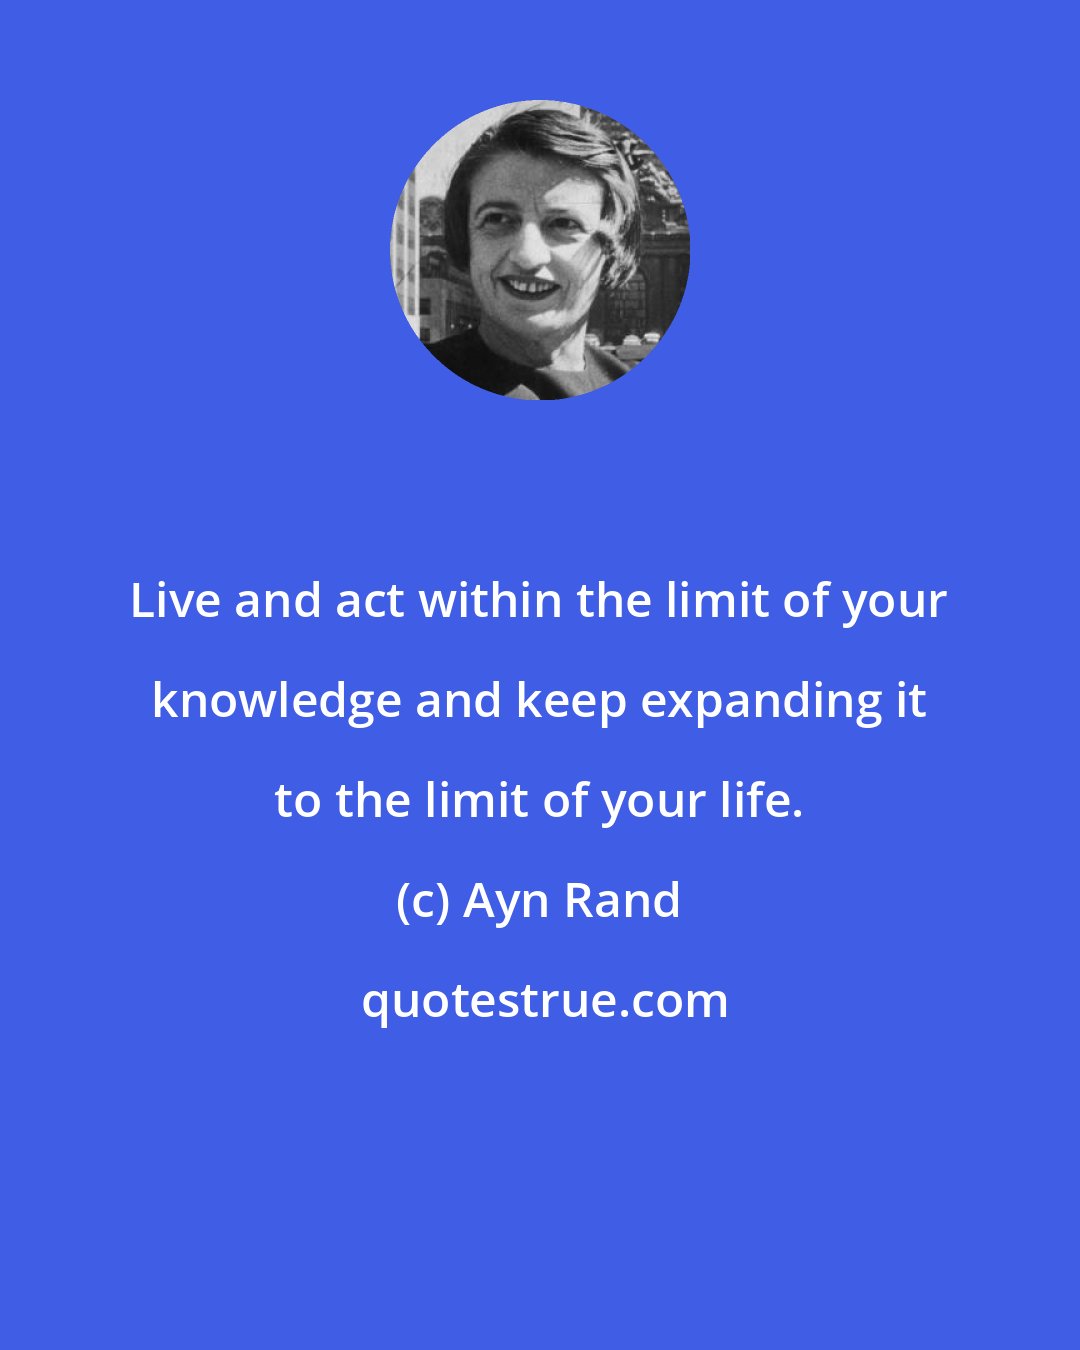 Ayn Rand: Live and act within the limit of your knowledge and keep expanding it to the limit of your life.